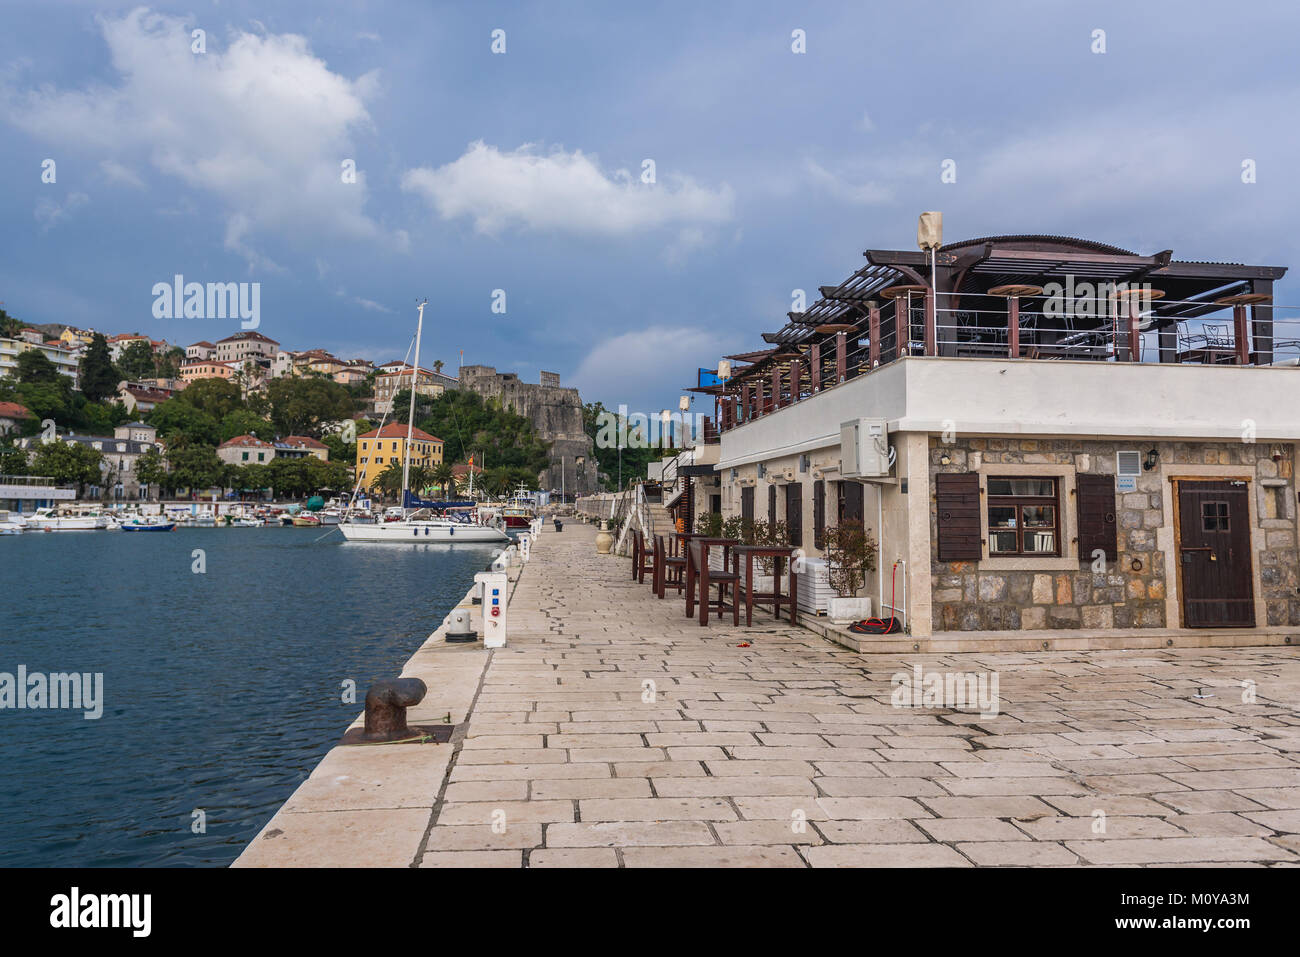 Admiral Cafe & Restaurant on a breakwater of Herceg Novi port on the Adriatic Sea coast in Montenegro. Forte Mare on background Stock Photo